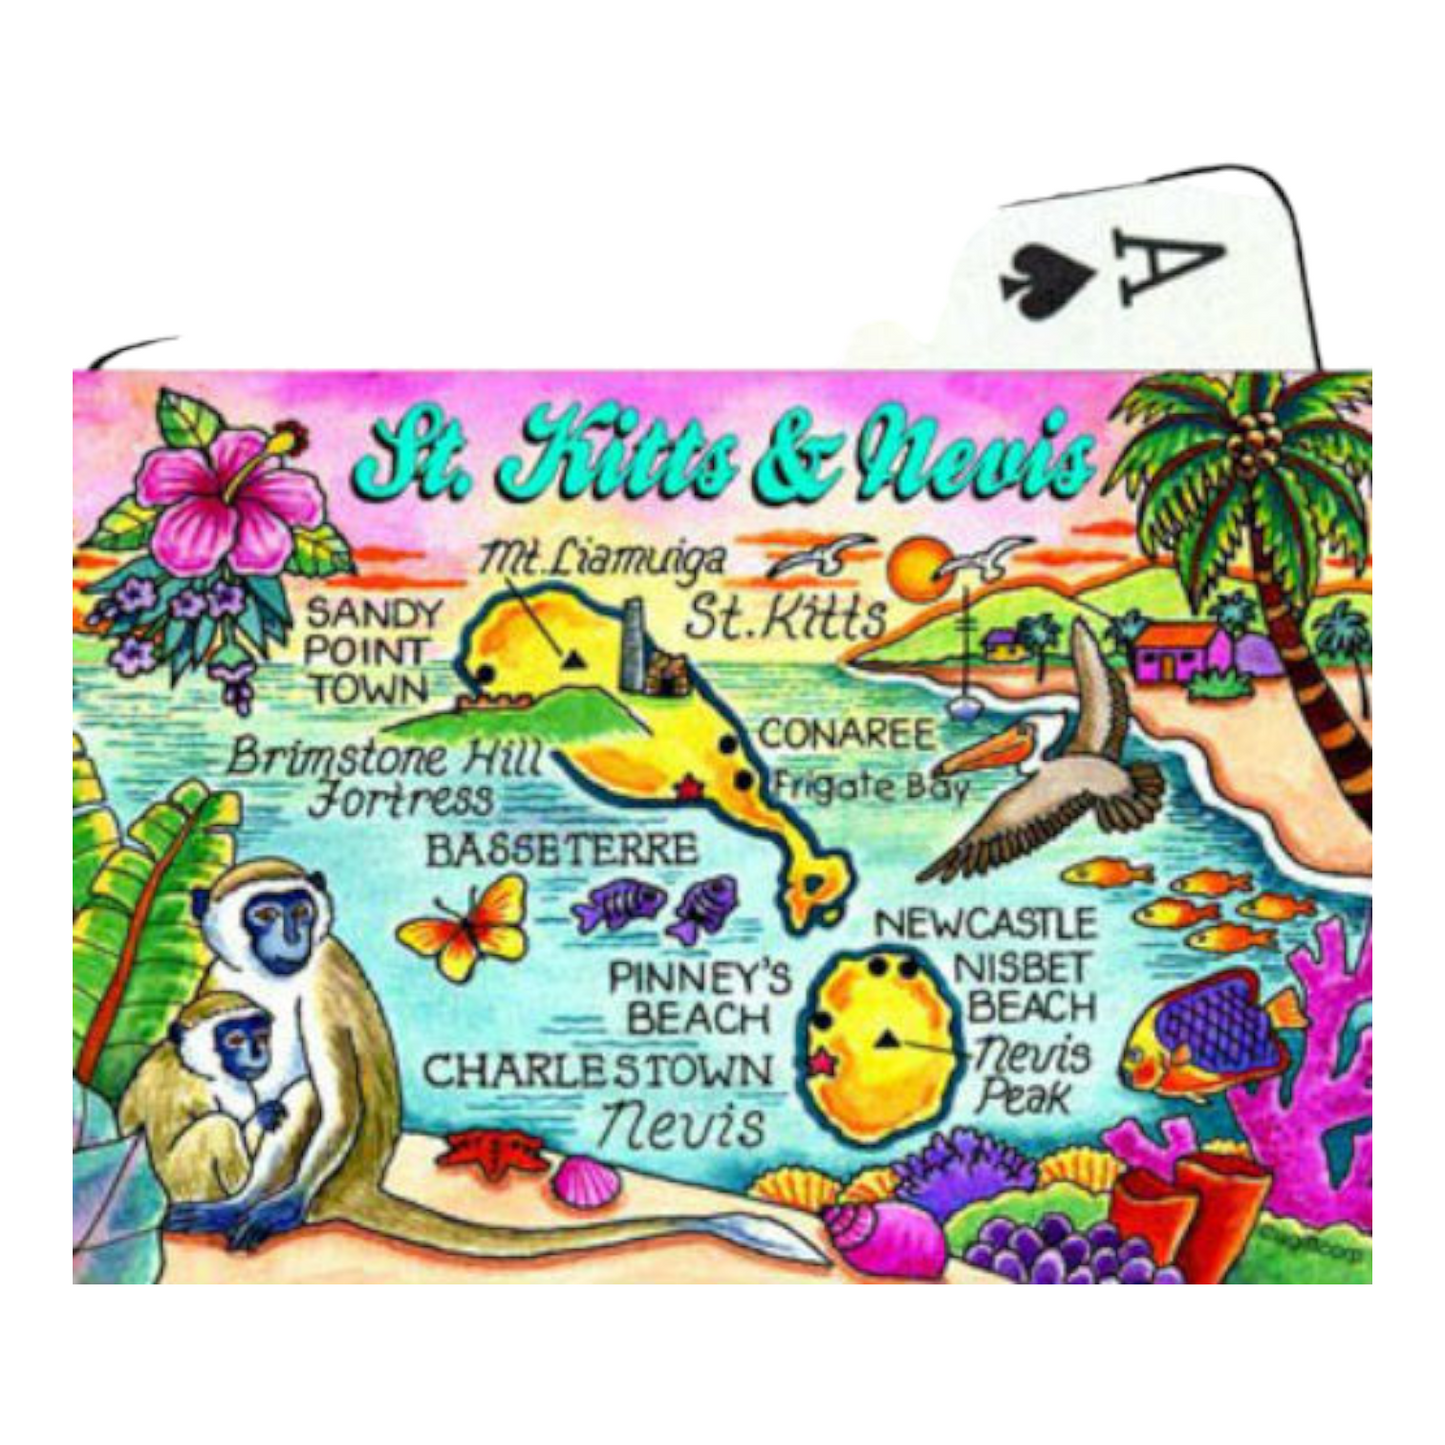 St. Kitts and Nevis Map Collectible Souvenir Playing Cards